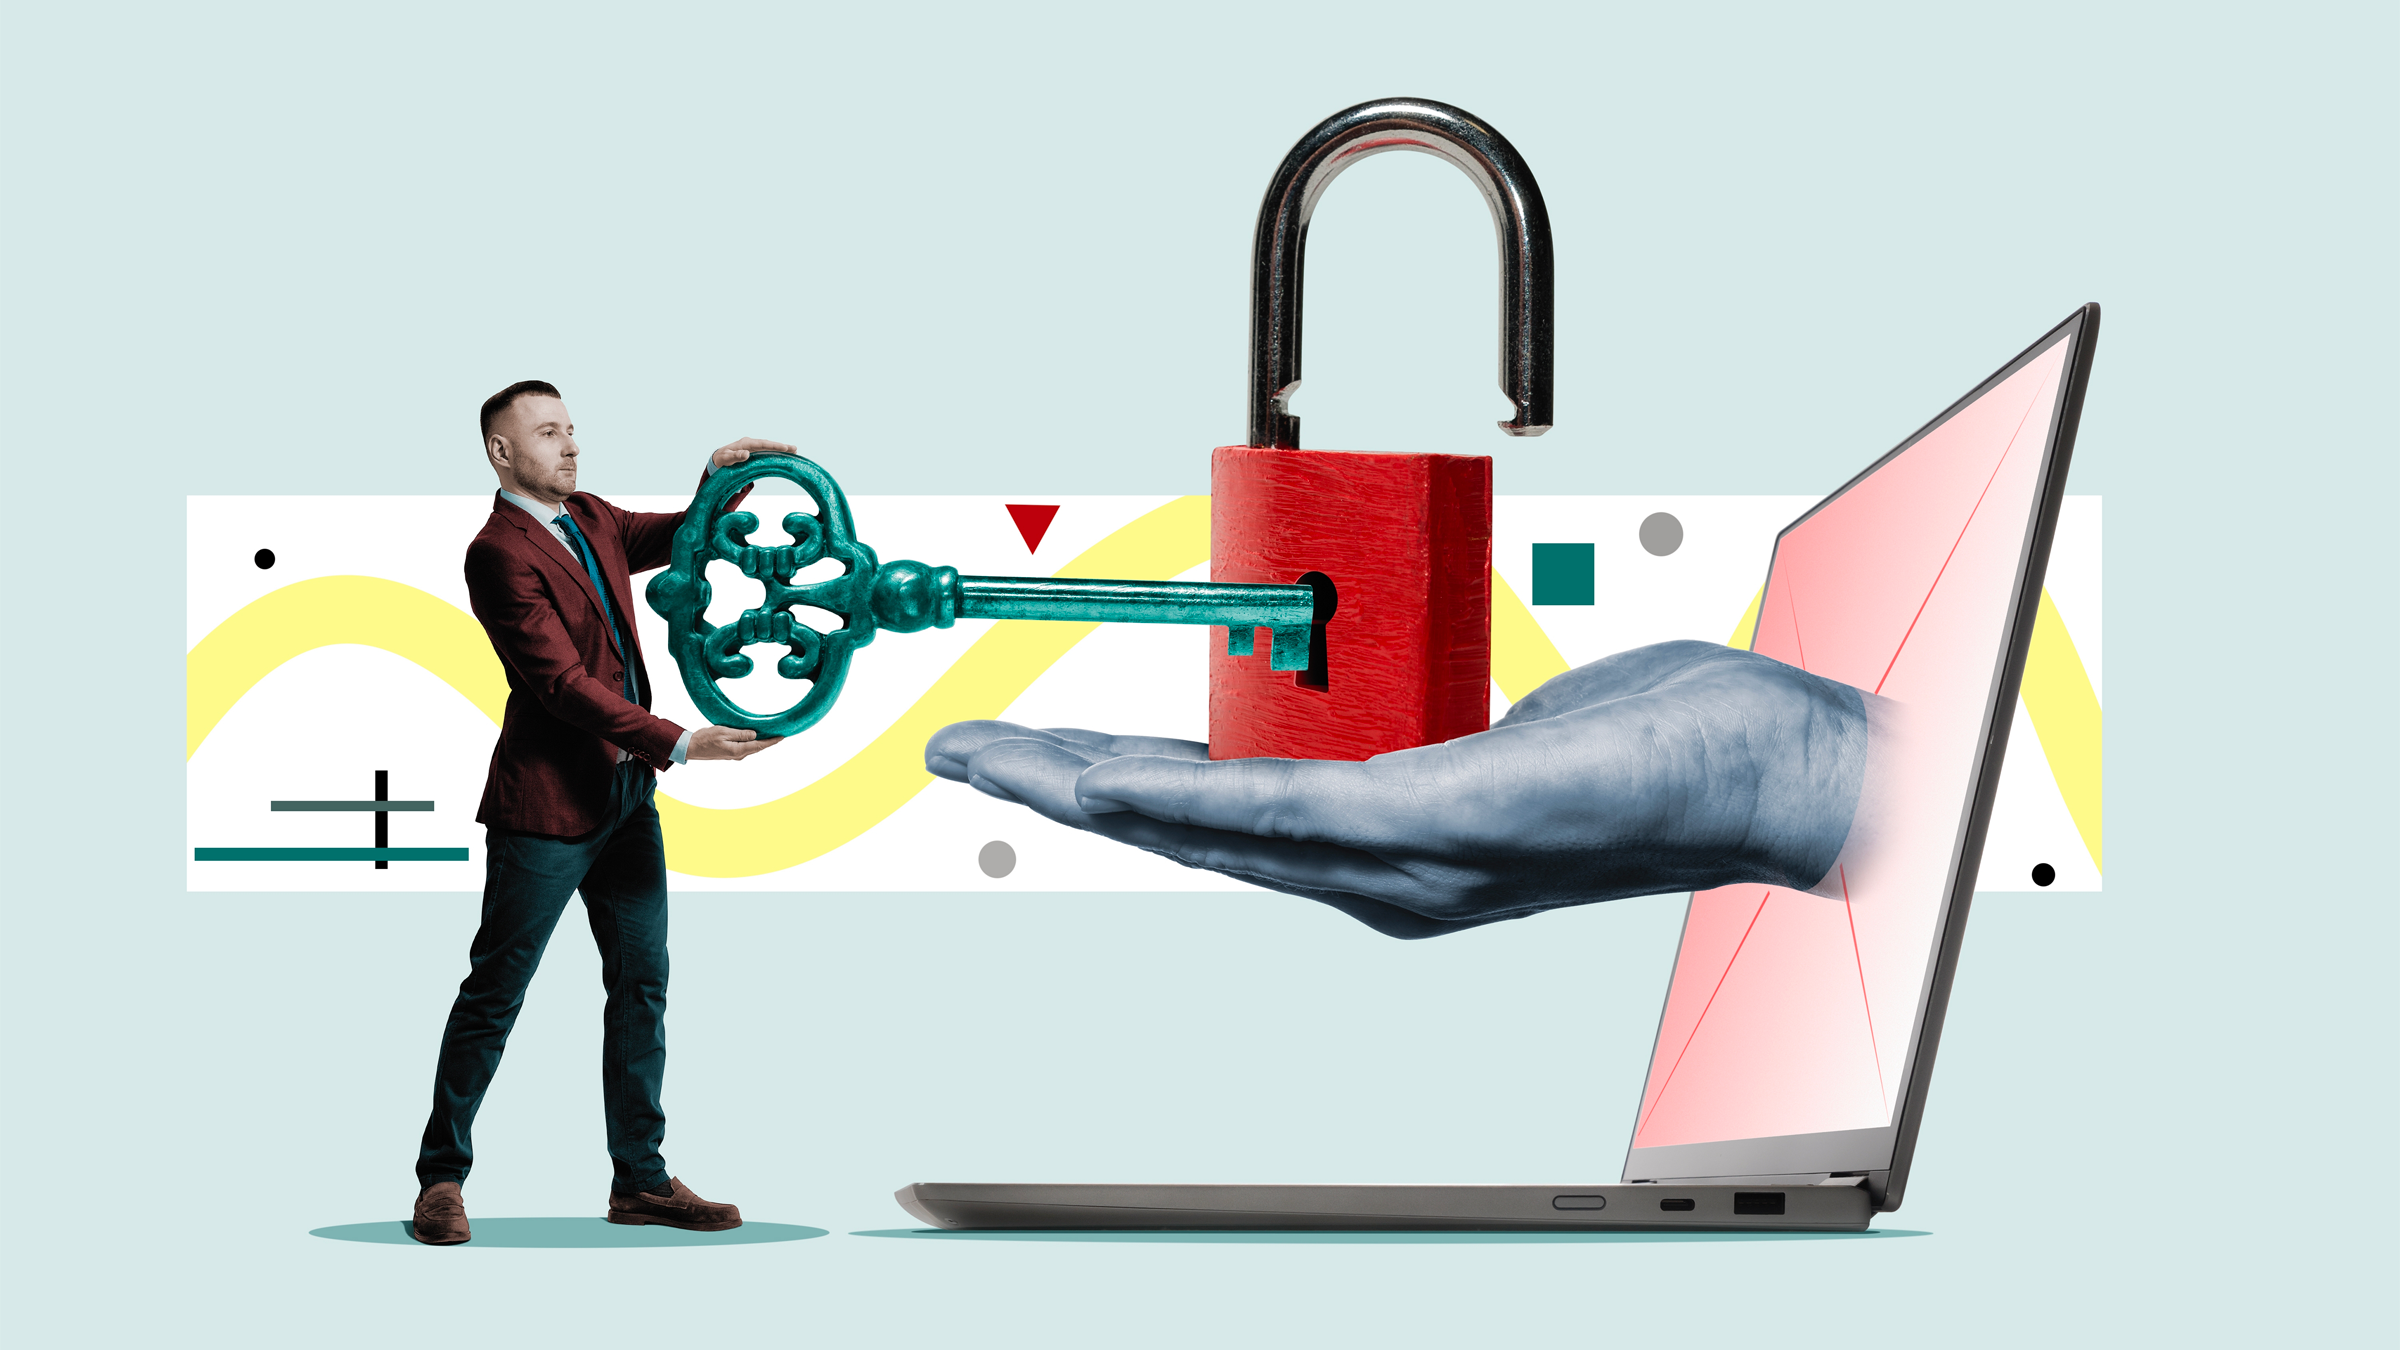 Illustration of a person unlocking a lock, held by a hand extending from a laptop.